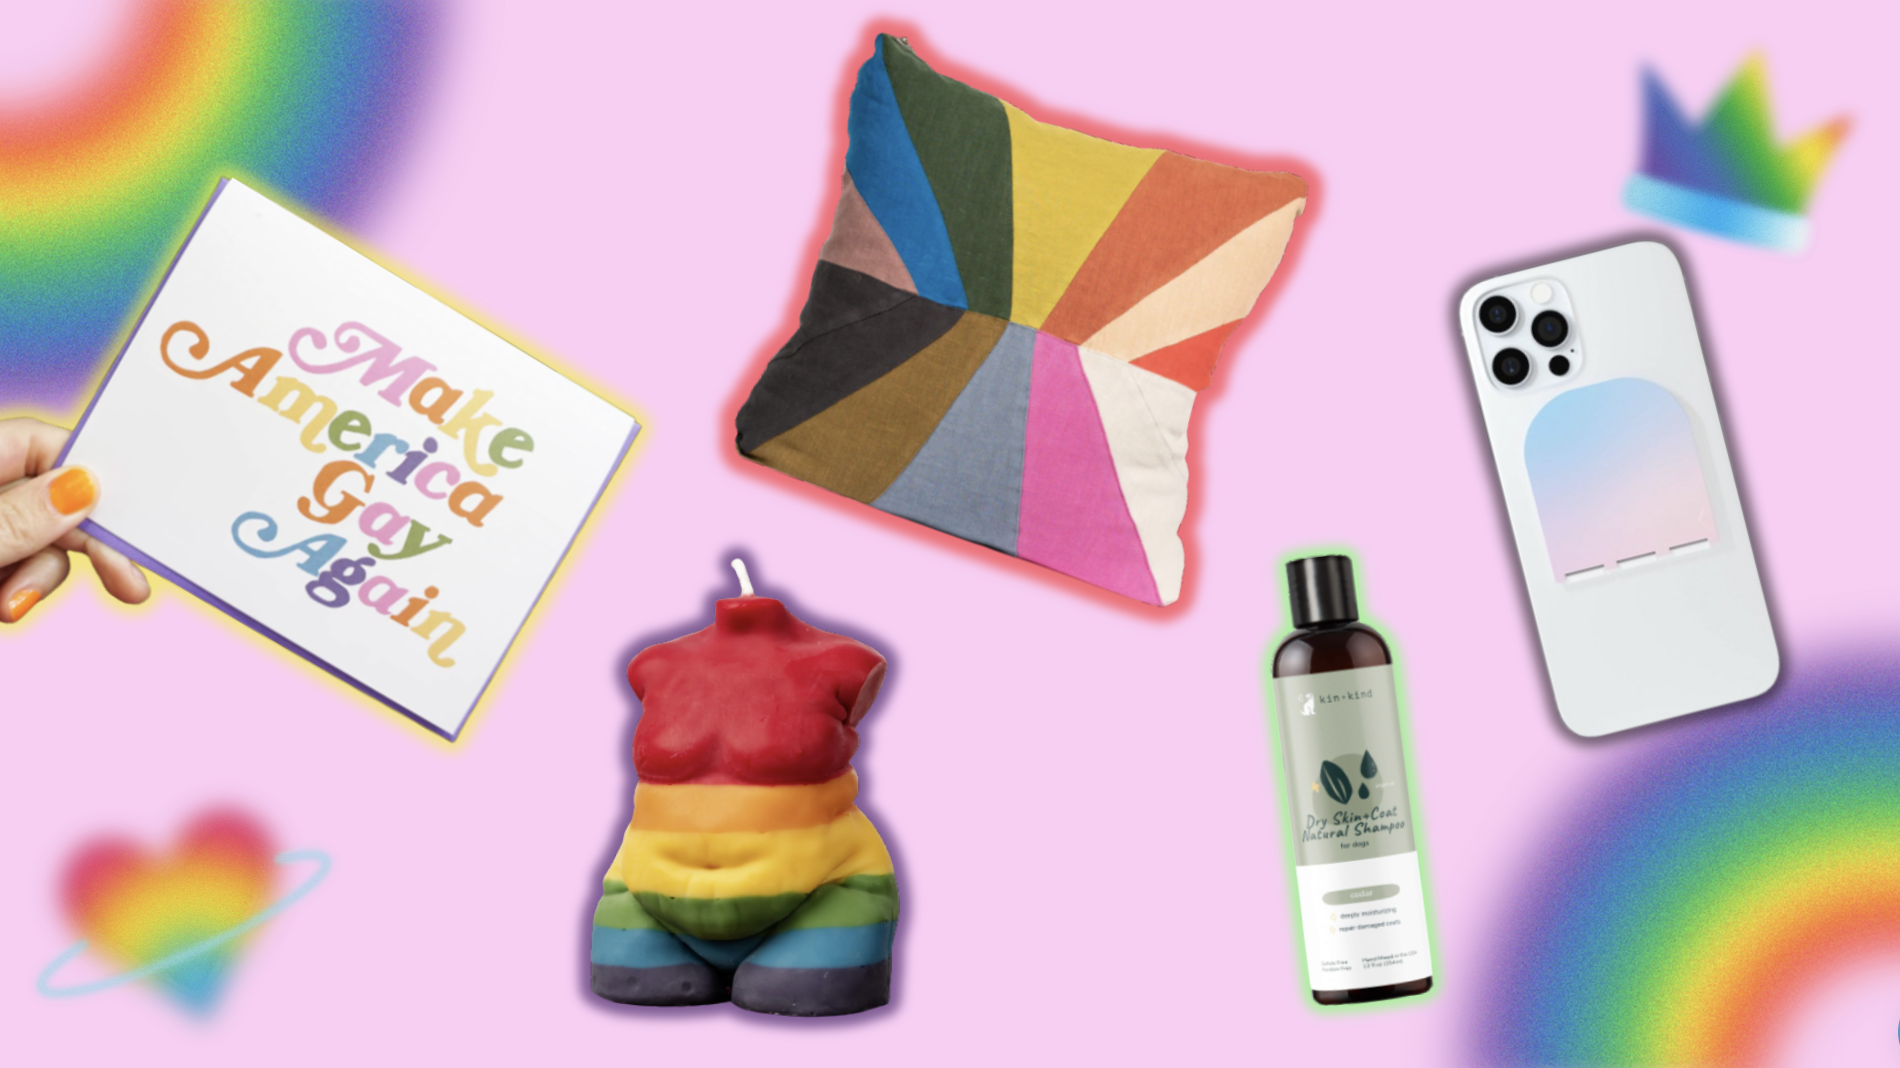 Items from Ash + Chess, CTOAN, Suay Sew Shop, kin+kind, and Flipstik from left to right over a colorful, Pride background.